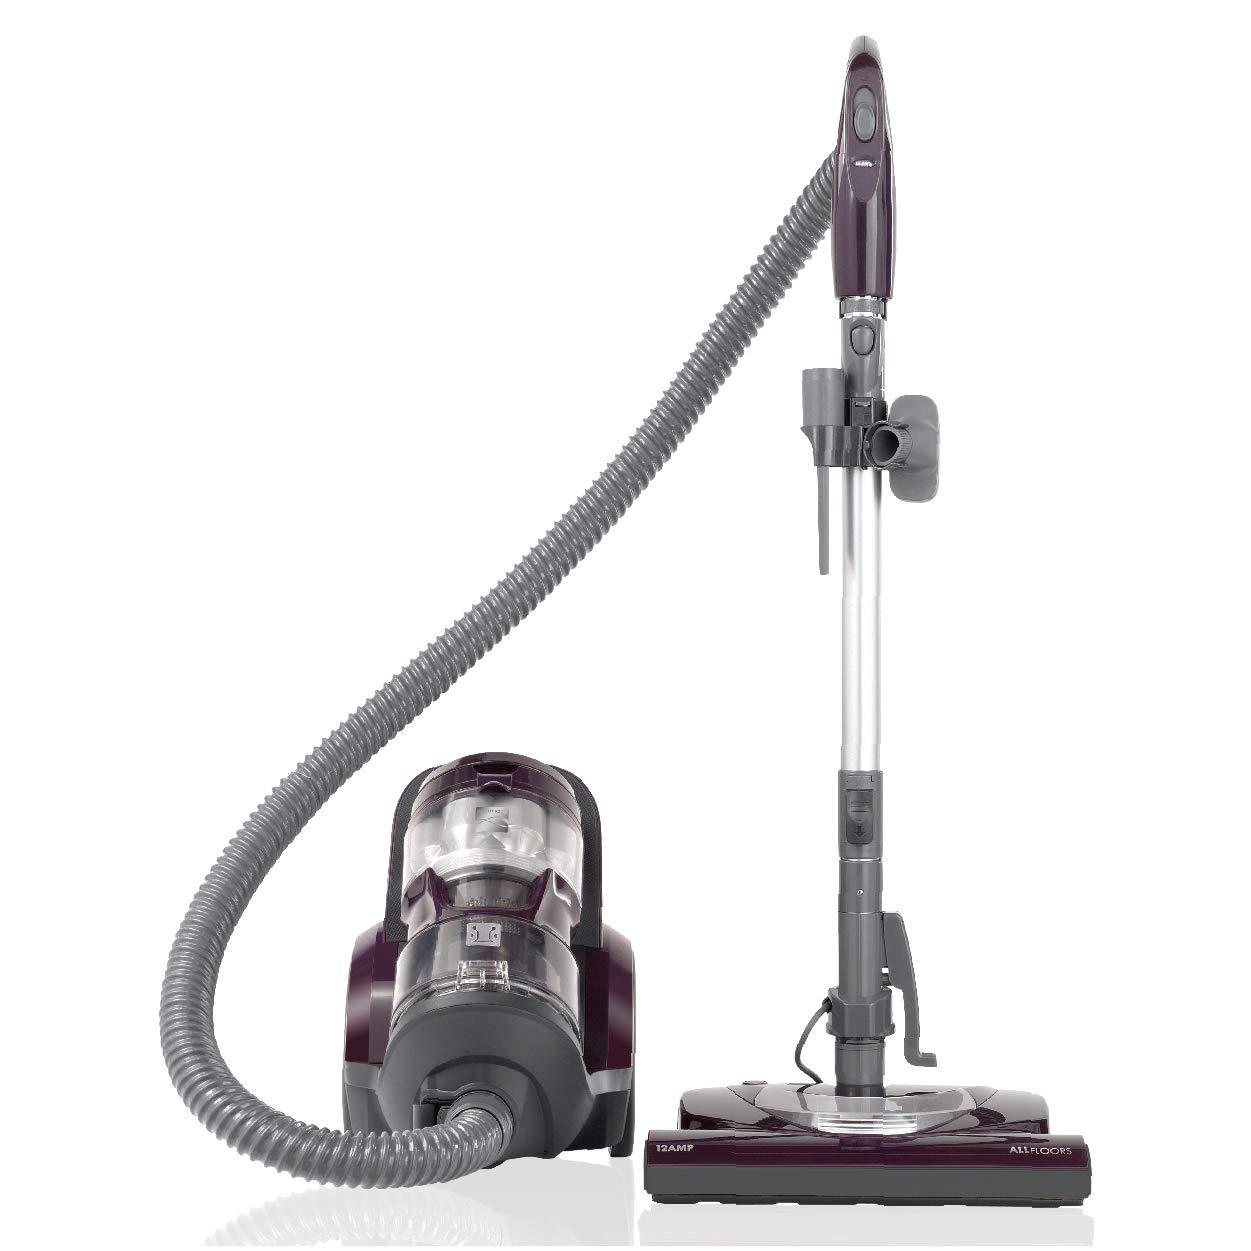 Kenmore Bagless Canister Vacuum, Eggplant - image 1 of 6